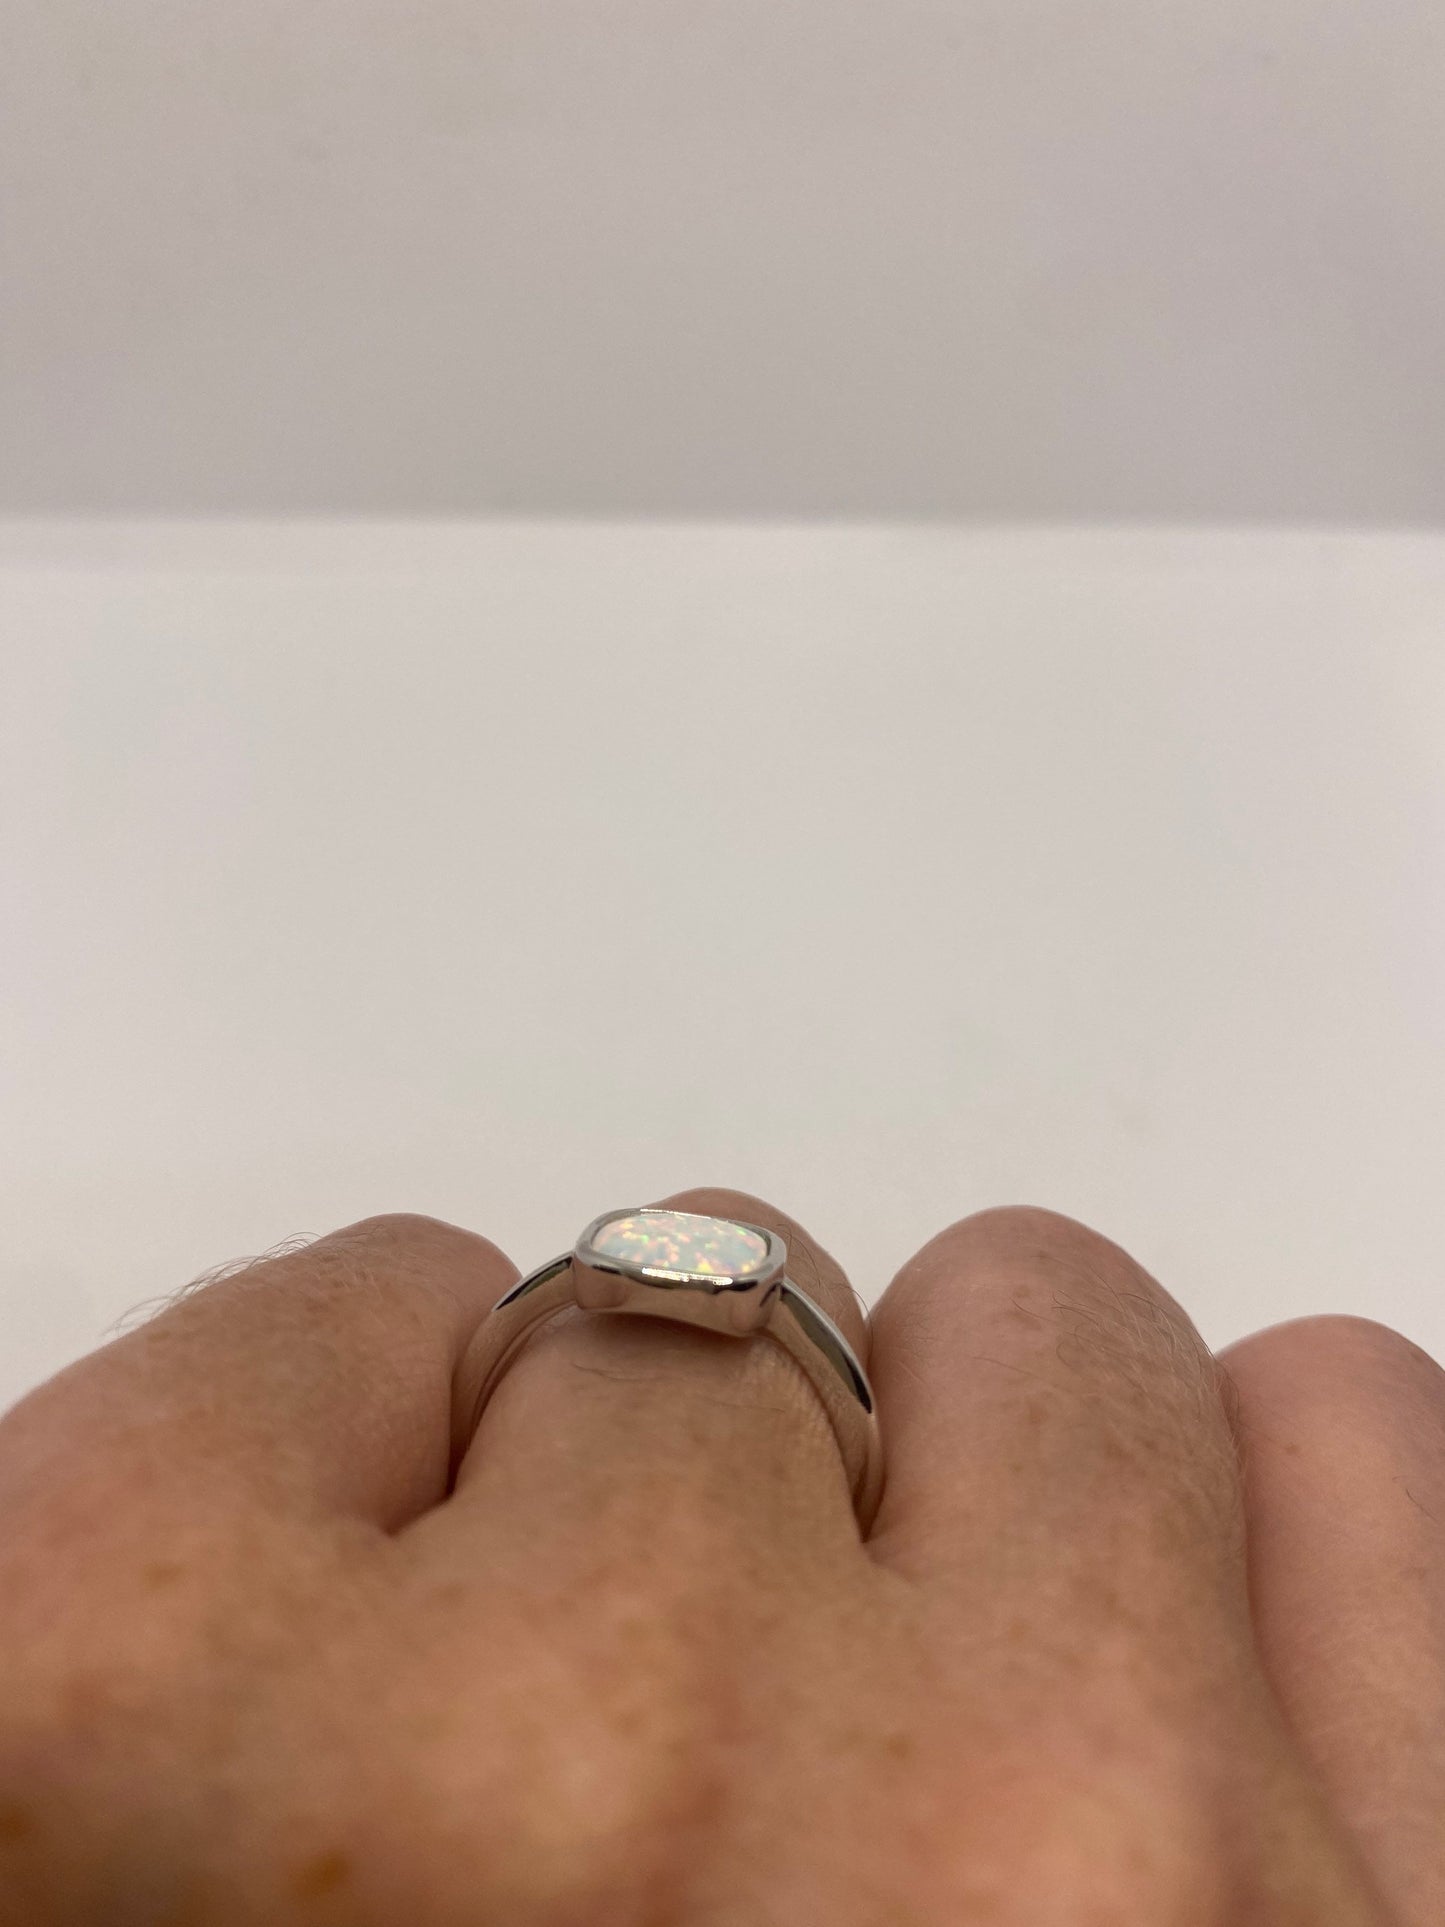 Vintage Opal 925 Sterling Silver Inlay Ring